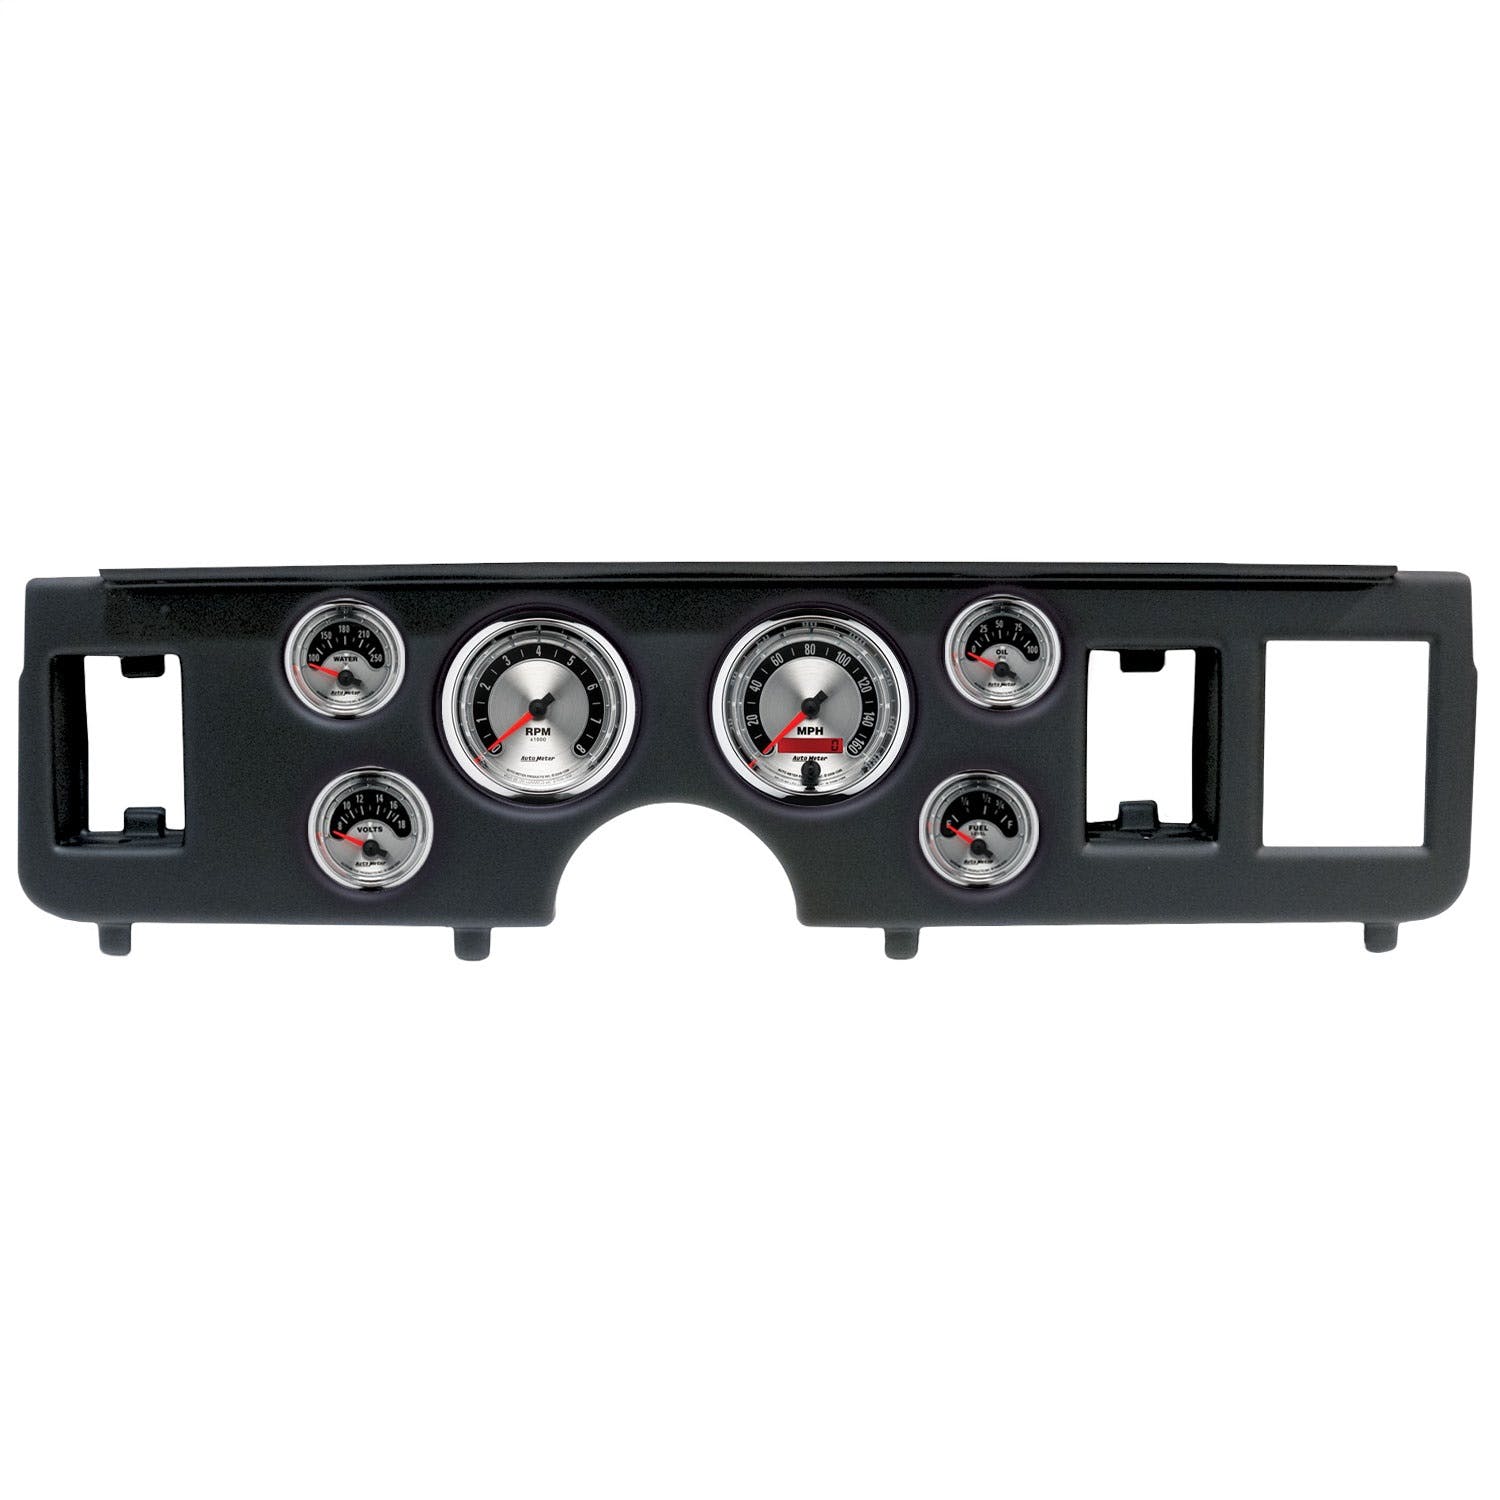 AutoMeter Products 2917-01 6 Gauge Direct-Fit Dash Kit, Ford Mustang 79-86, American Muscle